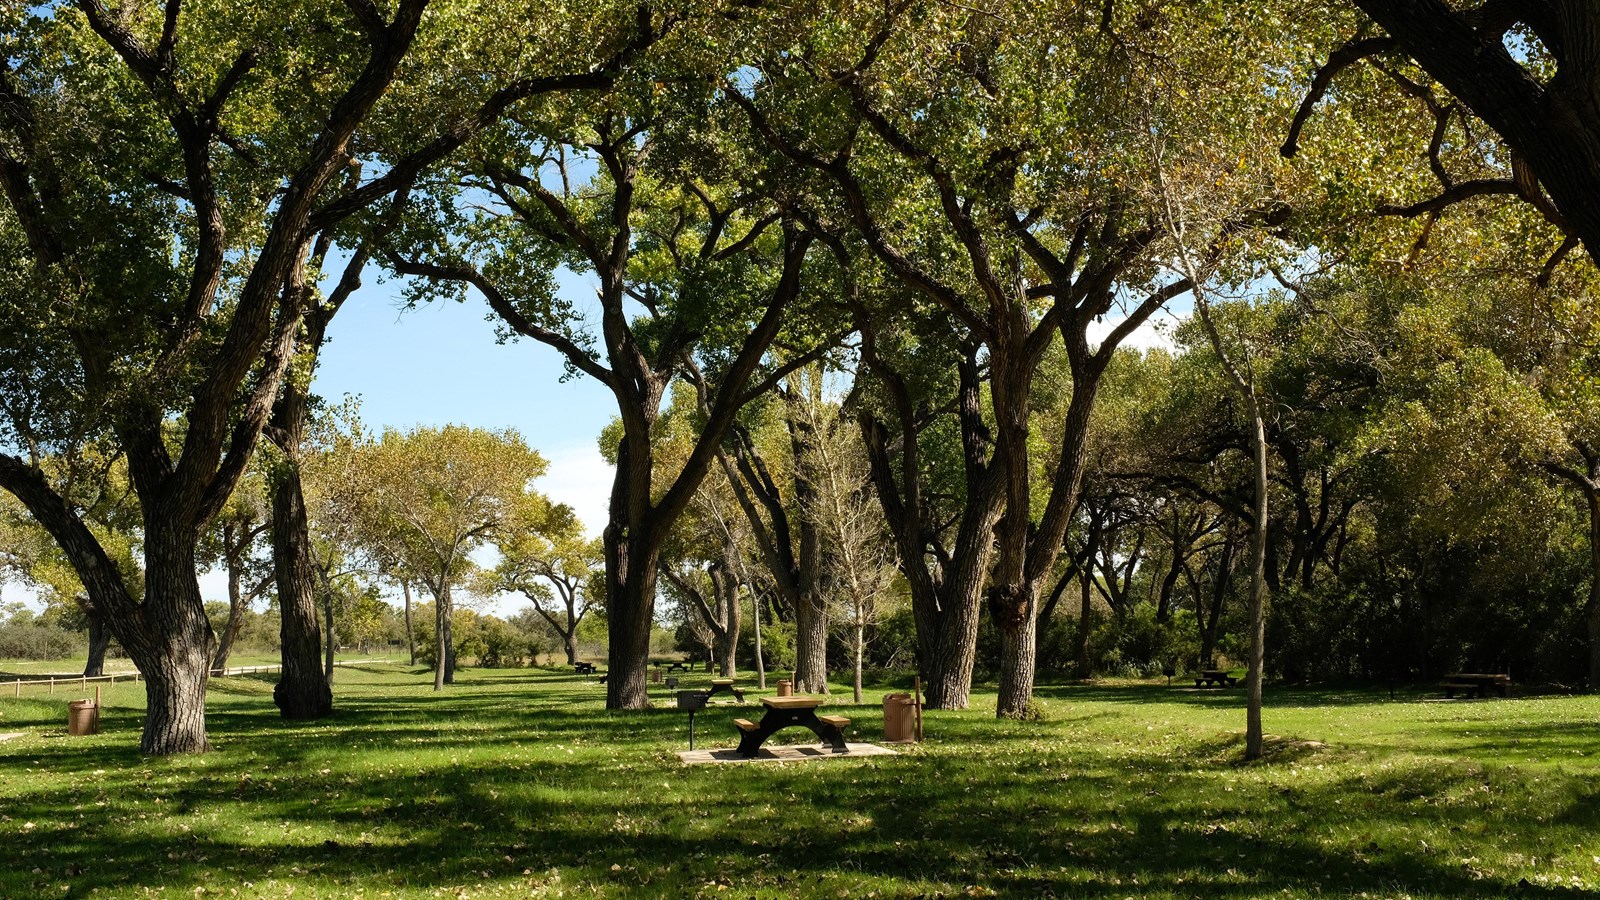 Photo of the grassy area and large cottonwood trees at Rattlesnake Springs.